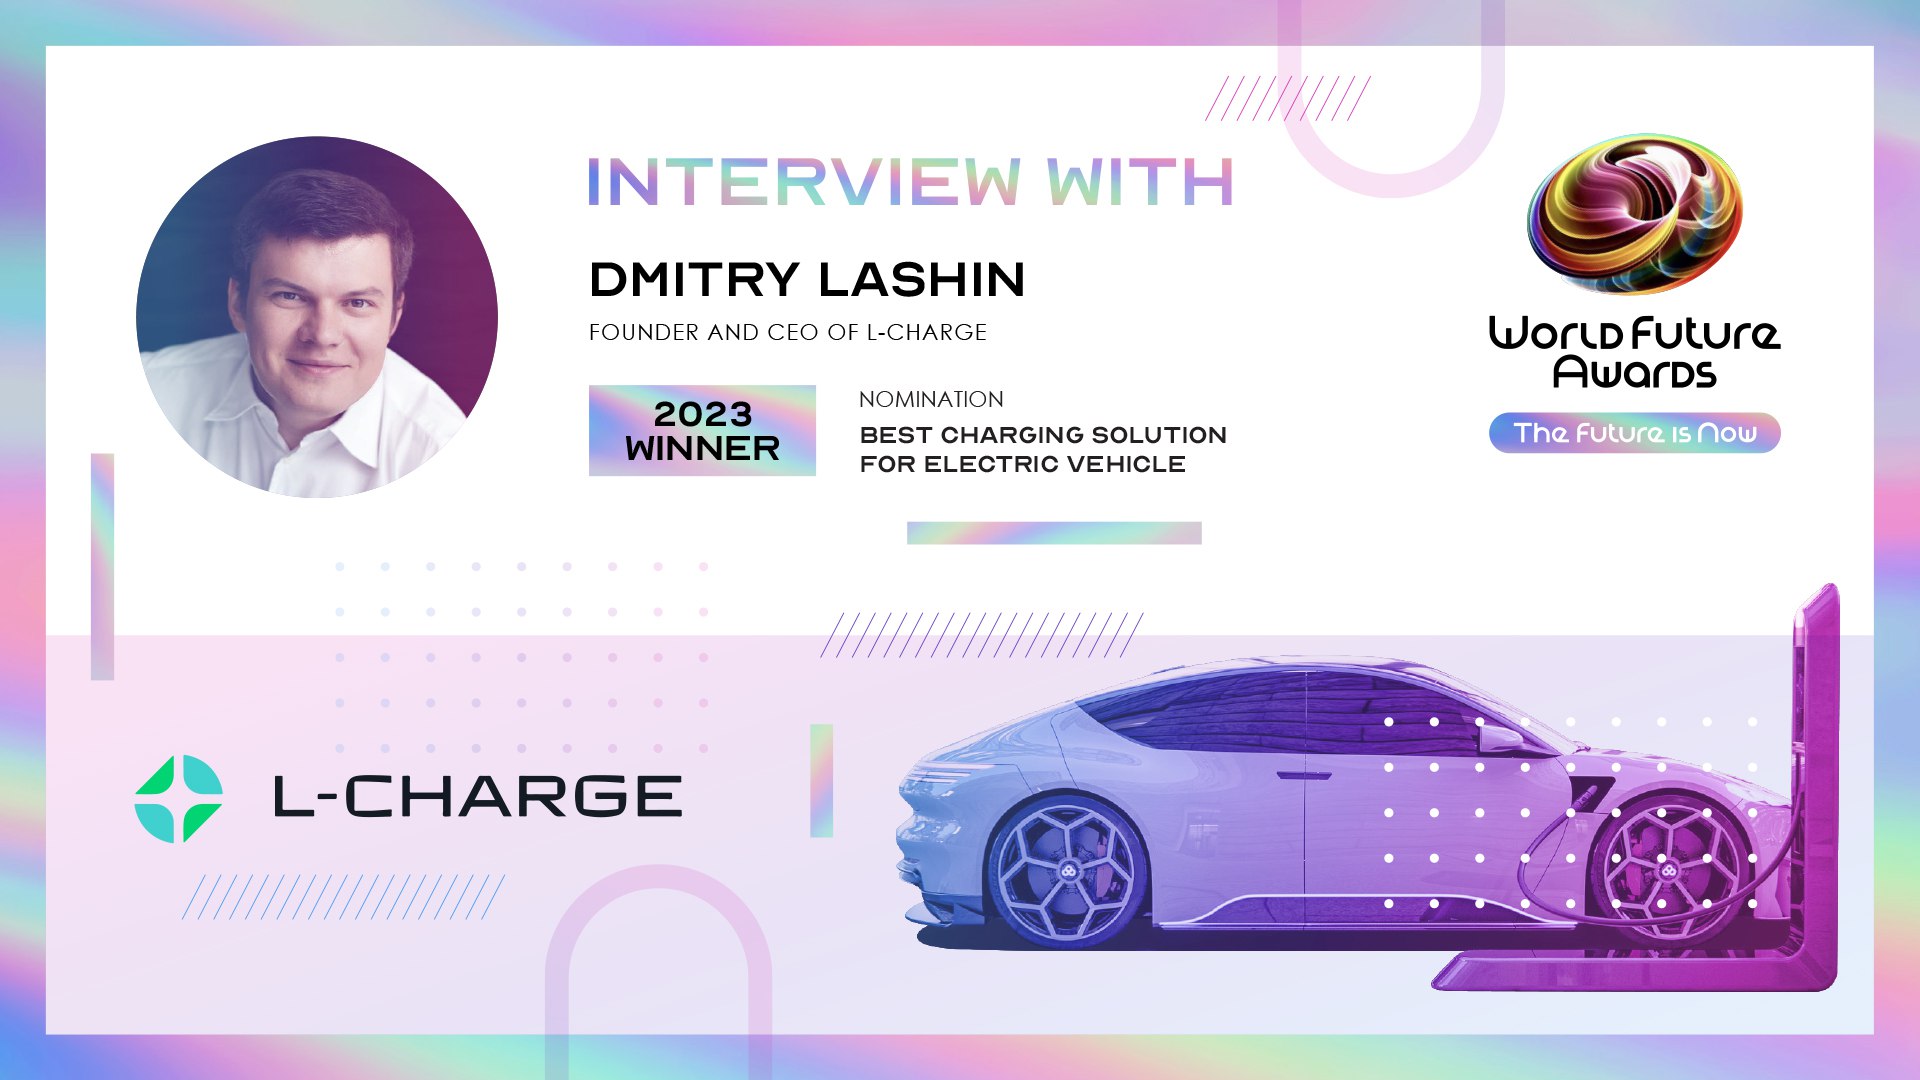 Interview with Dmitry Lashin, Founder and CEO of L-Charge